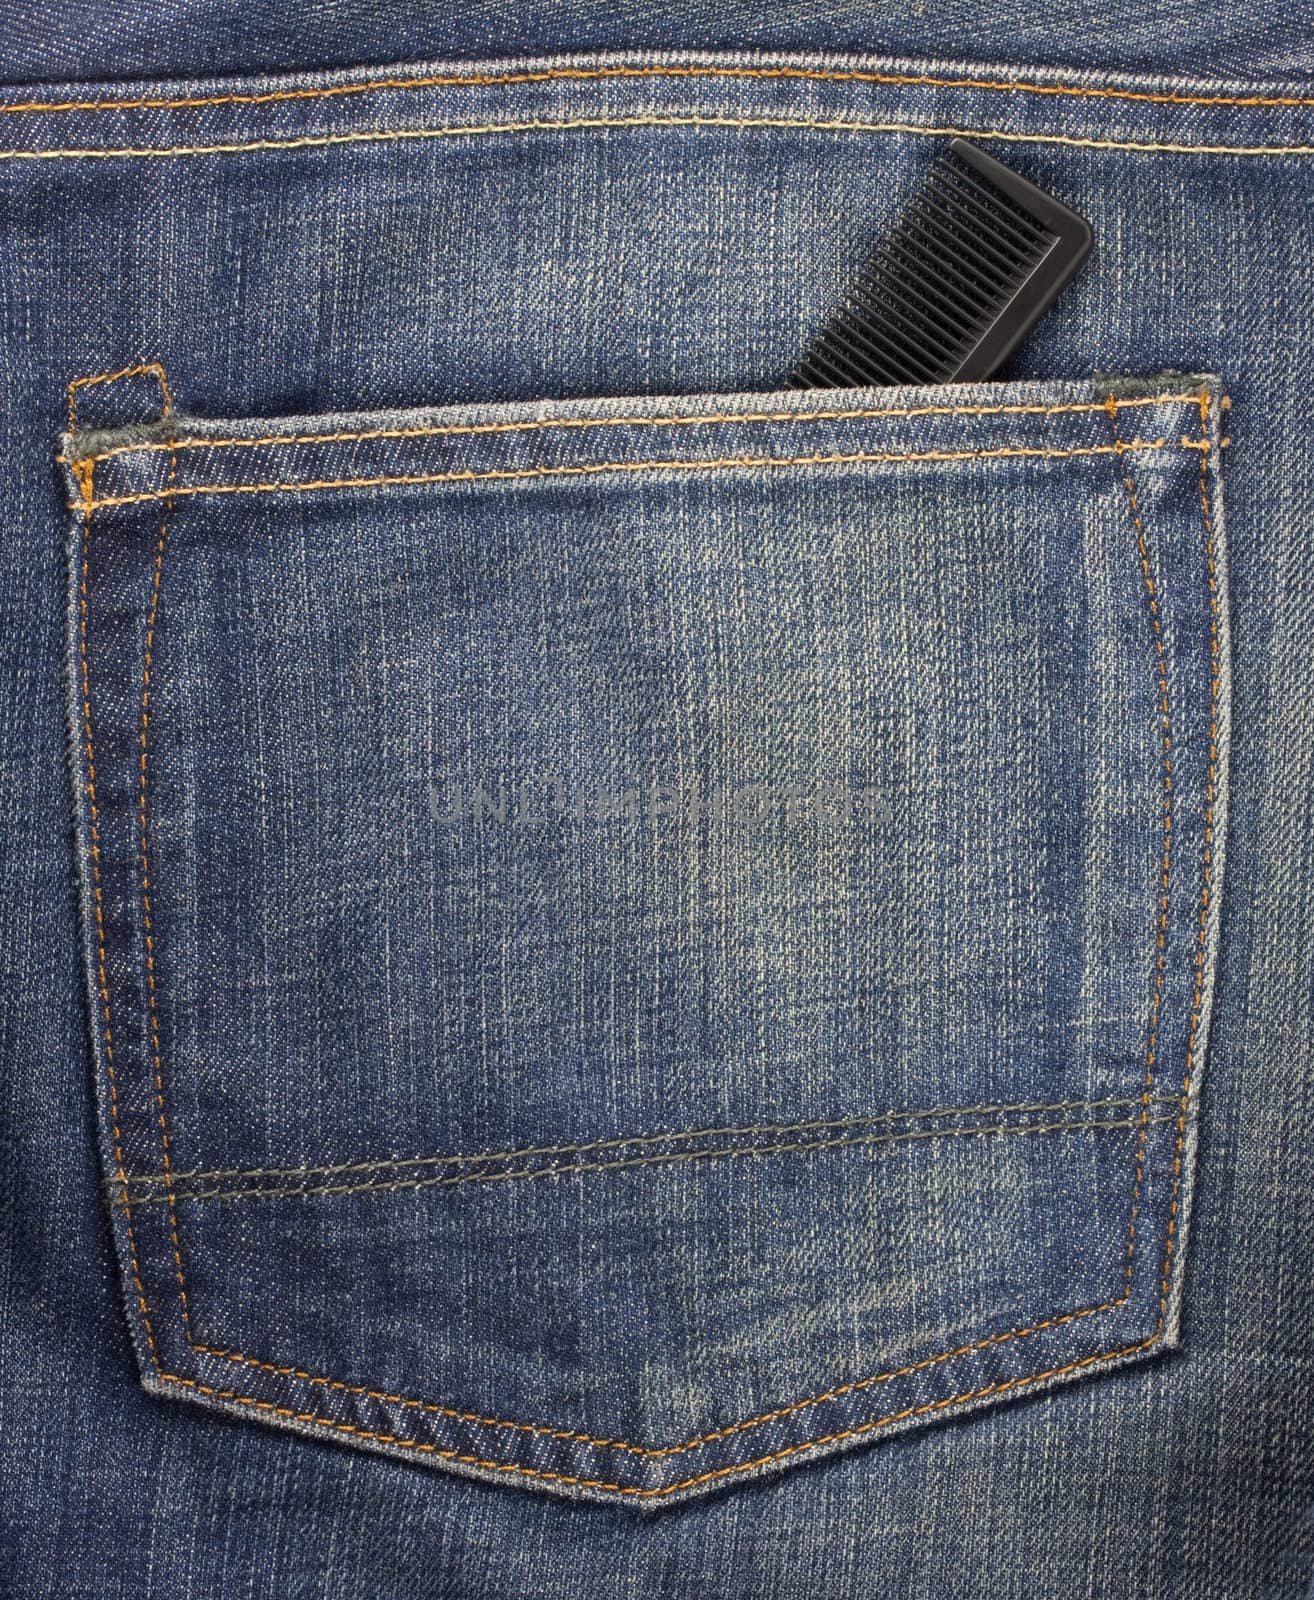 jeans back pocket with a comb by PixelsAway